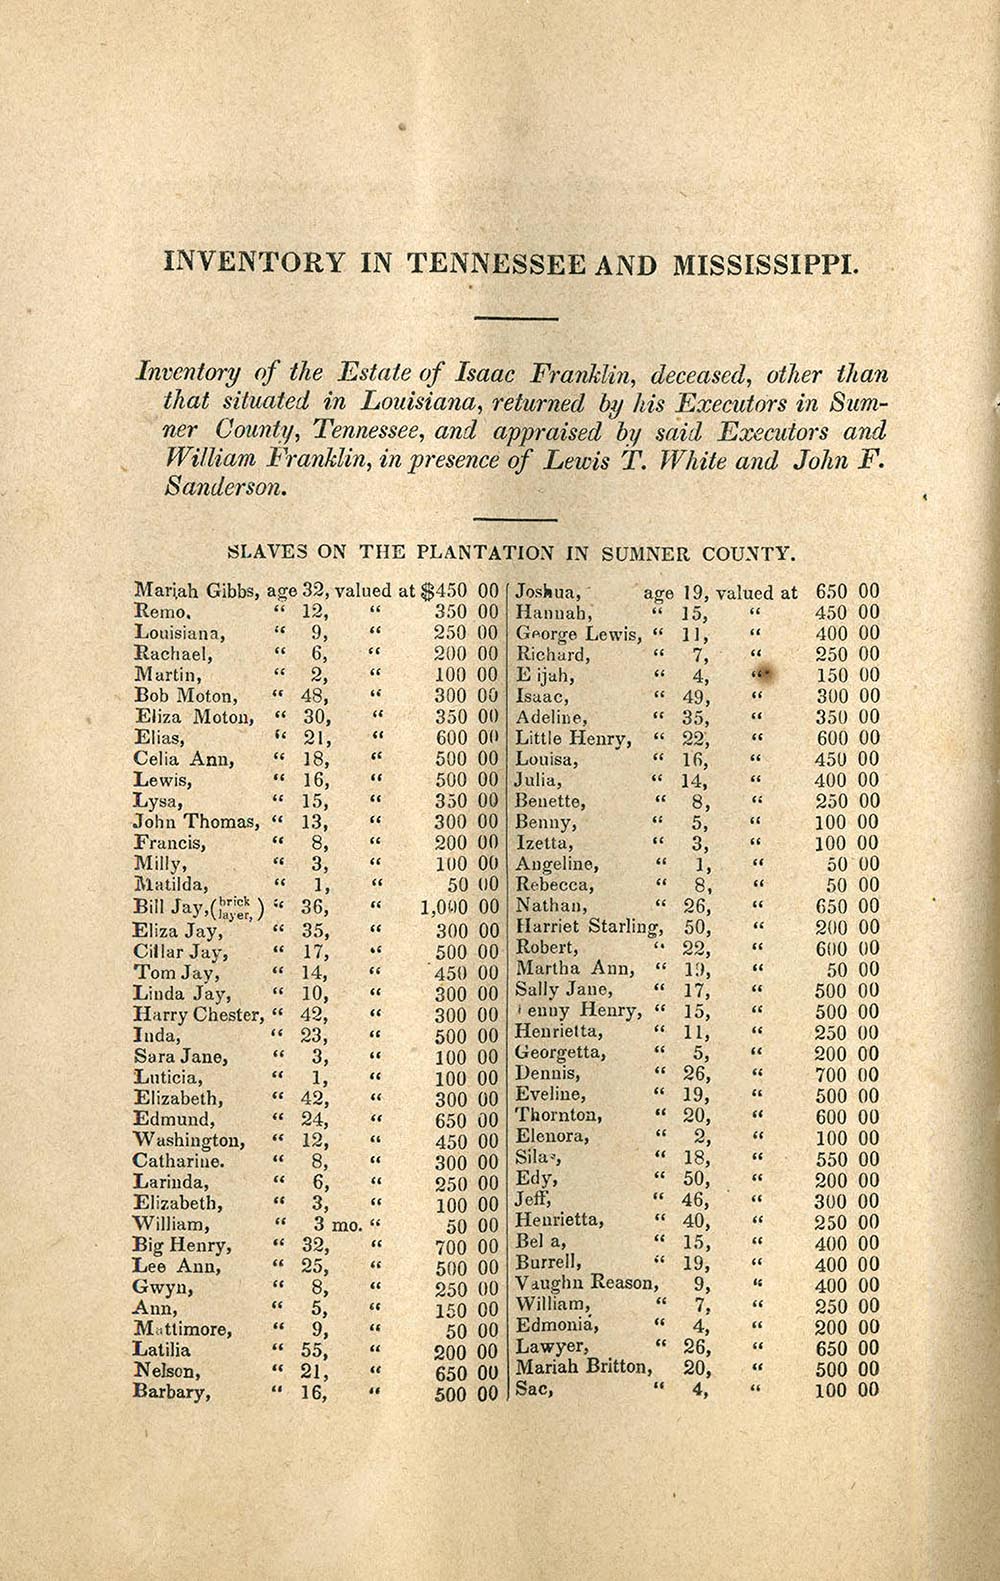 An inventory of Isaac Franklin’s slaves on his plantation, Fairvue